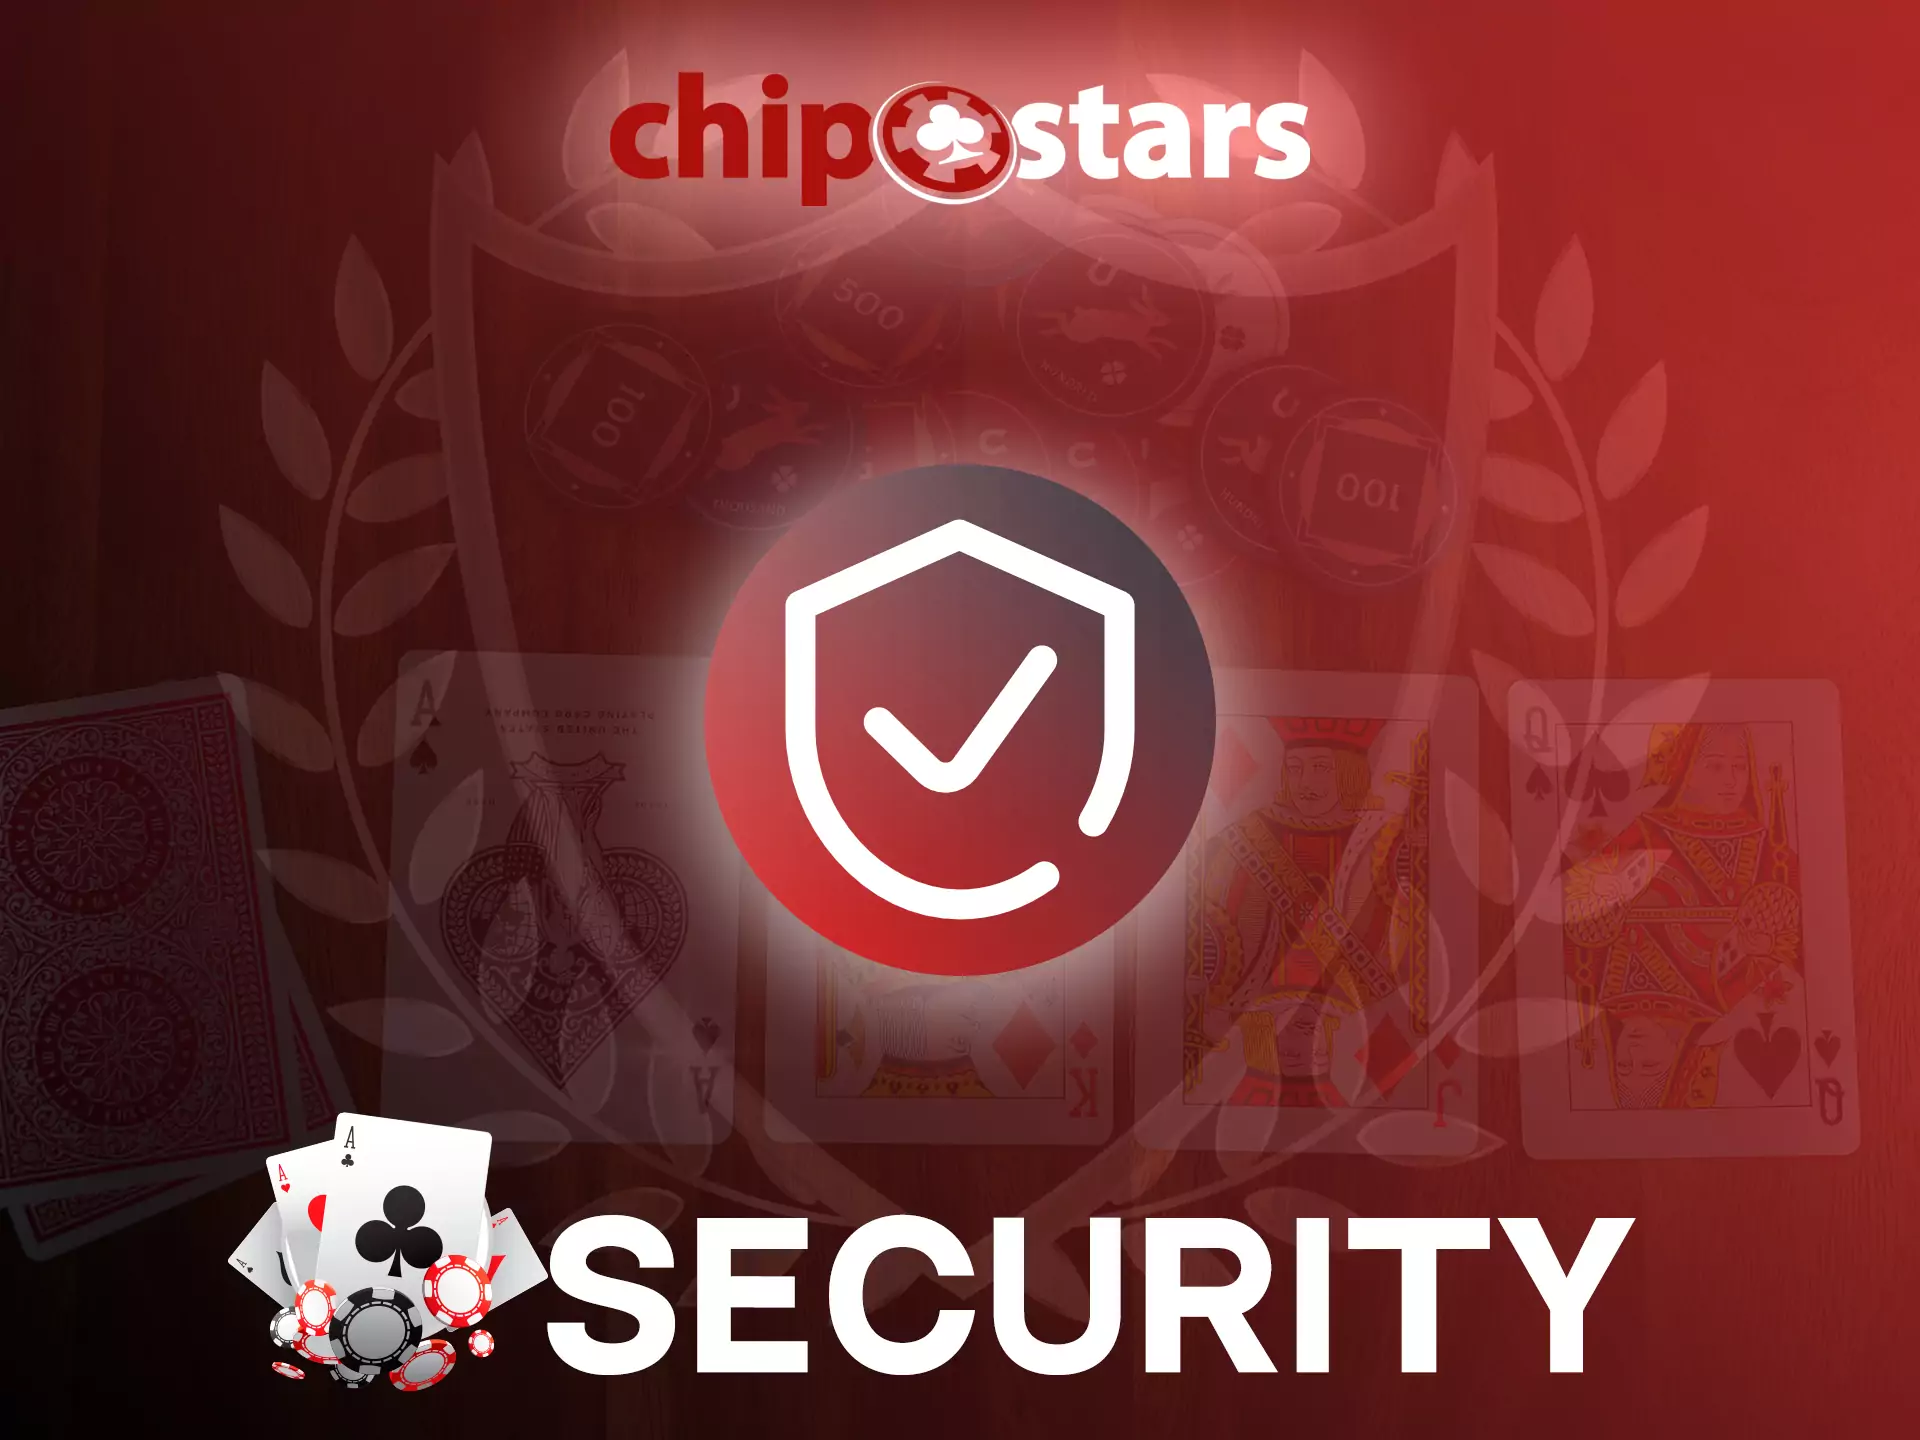 The Chipstars site works securely and is safe for betting and playing casino games in India.